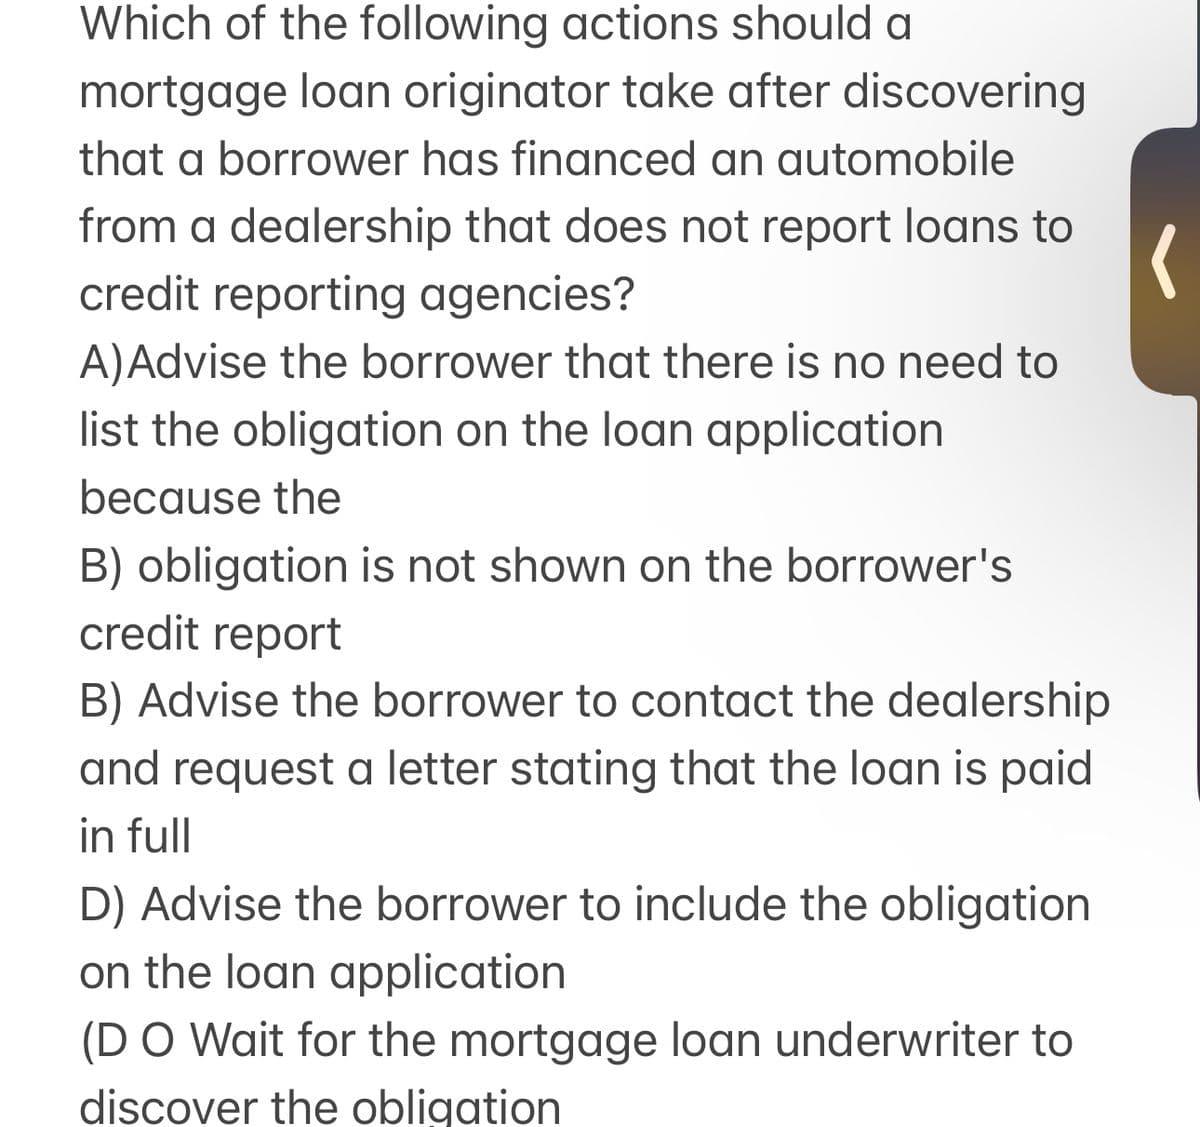 Which of the following actions should a
mortgage loan originator take after discovering
that a borrower has financed an automobile
from a dealership that does not report loans to
credit reporting agencies?
A)Advise the borrower that there is no need to
list the obligation on the loan application
because the
B) obligation is not shown on the borrower's
credit report
B) Advise the borrower to contact the dealership
and request a letter stating that the loan is paid
in full
D) Advise the borrower to include the obligation
on the loan application
(D O Wait for the mortgage loan underwriter to
discover the obligation
(